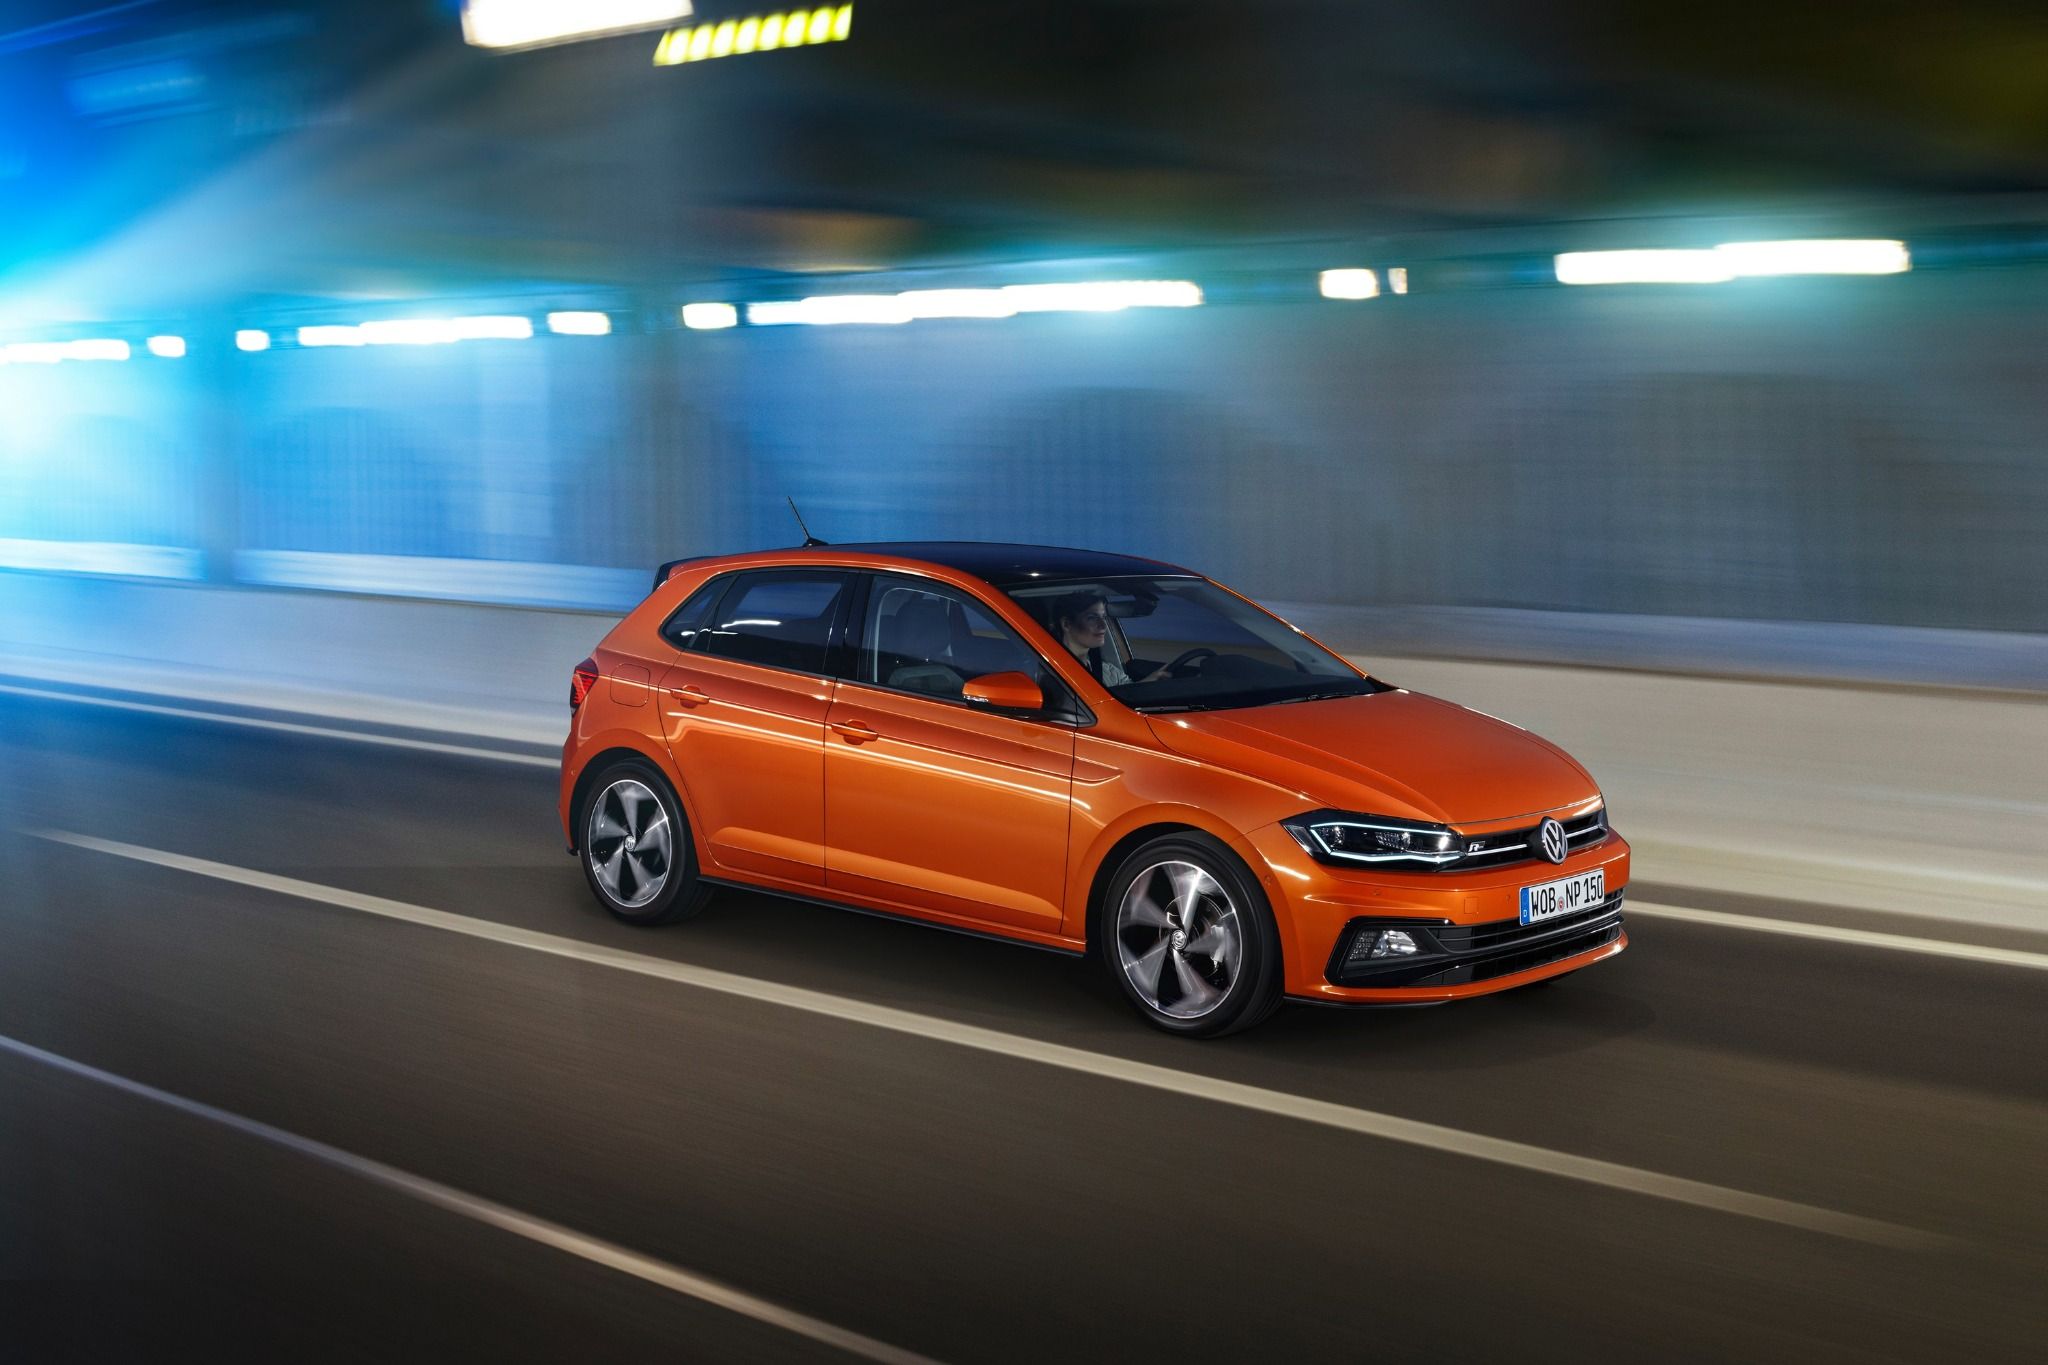 Front view of an orange VW Polo R driving down a road